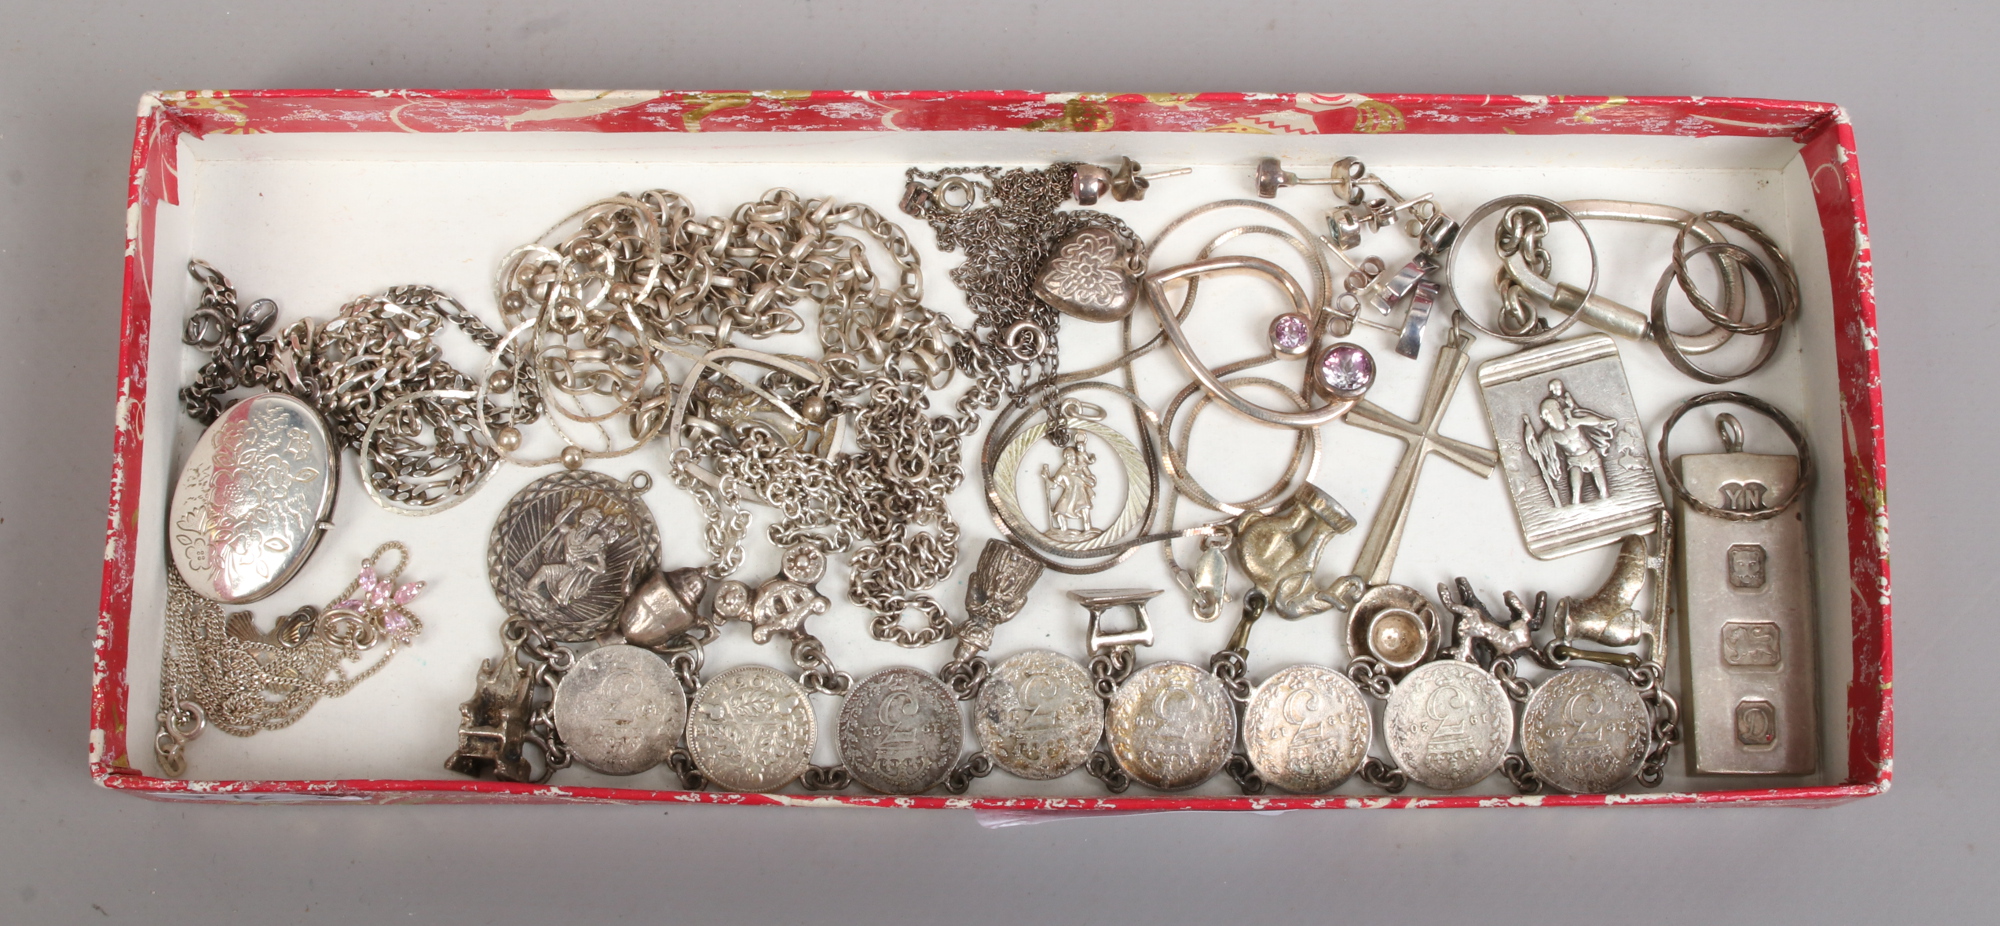 A collection of mostly silver jewellery to include charm bracelet, pendants on chains, rings and